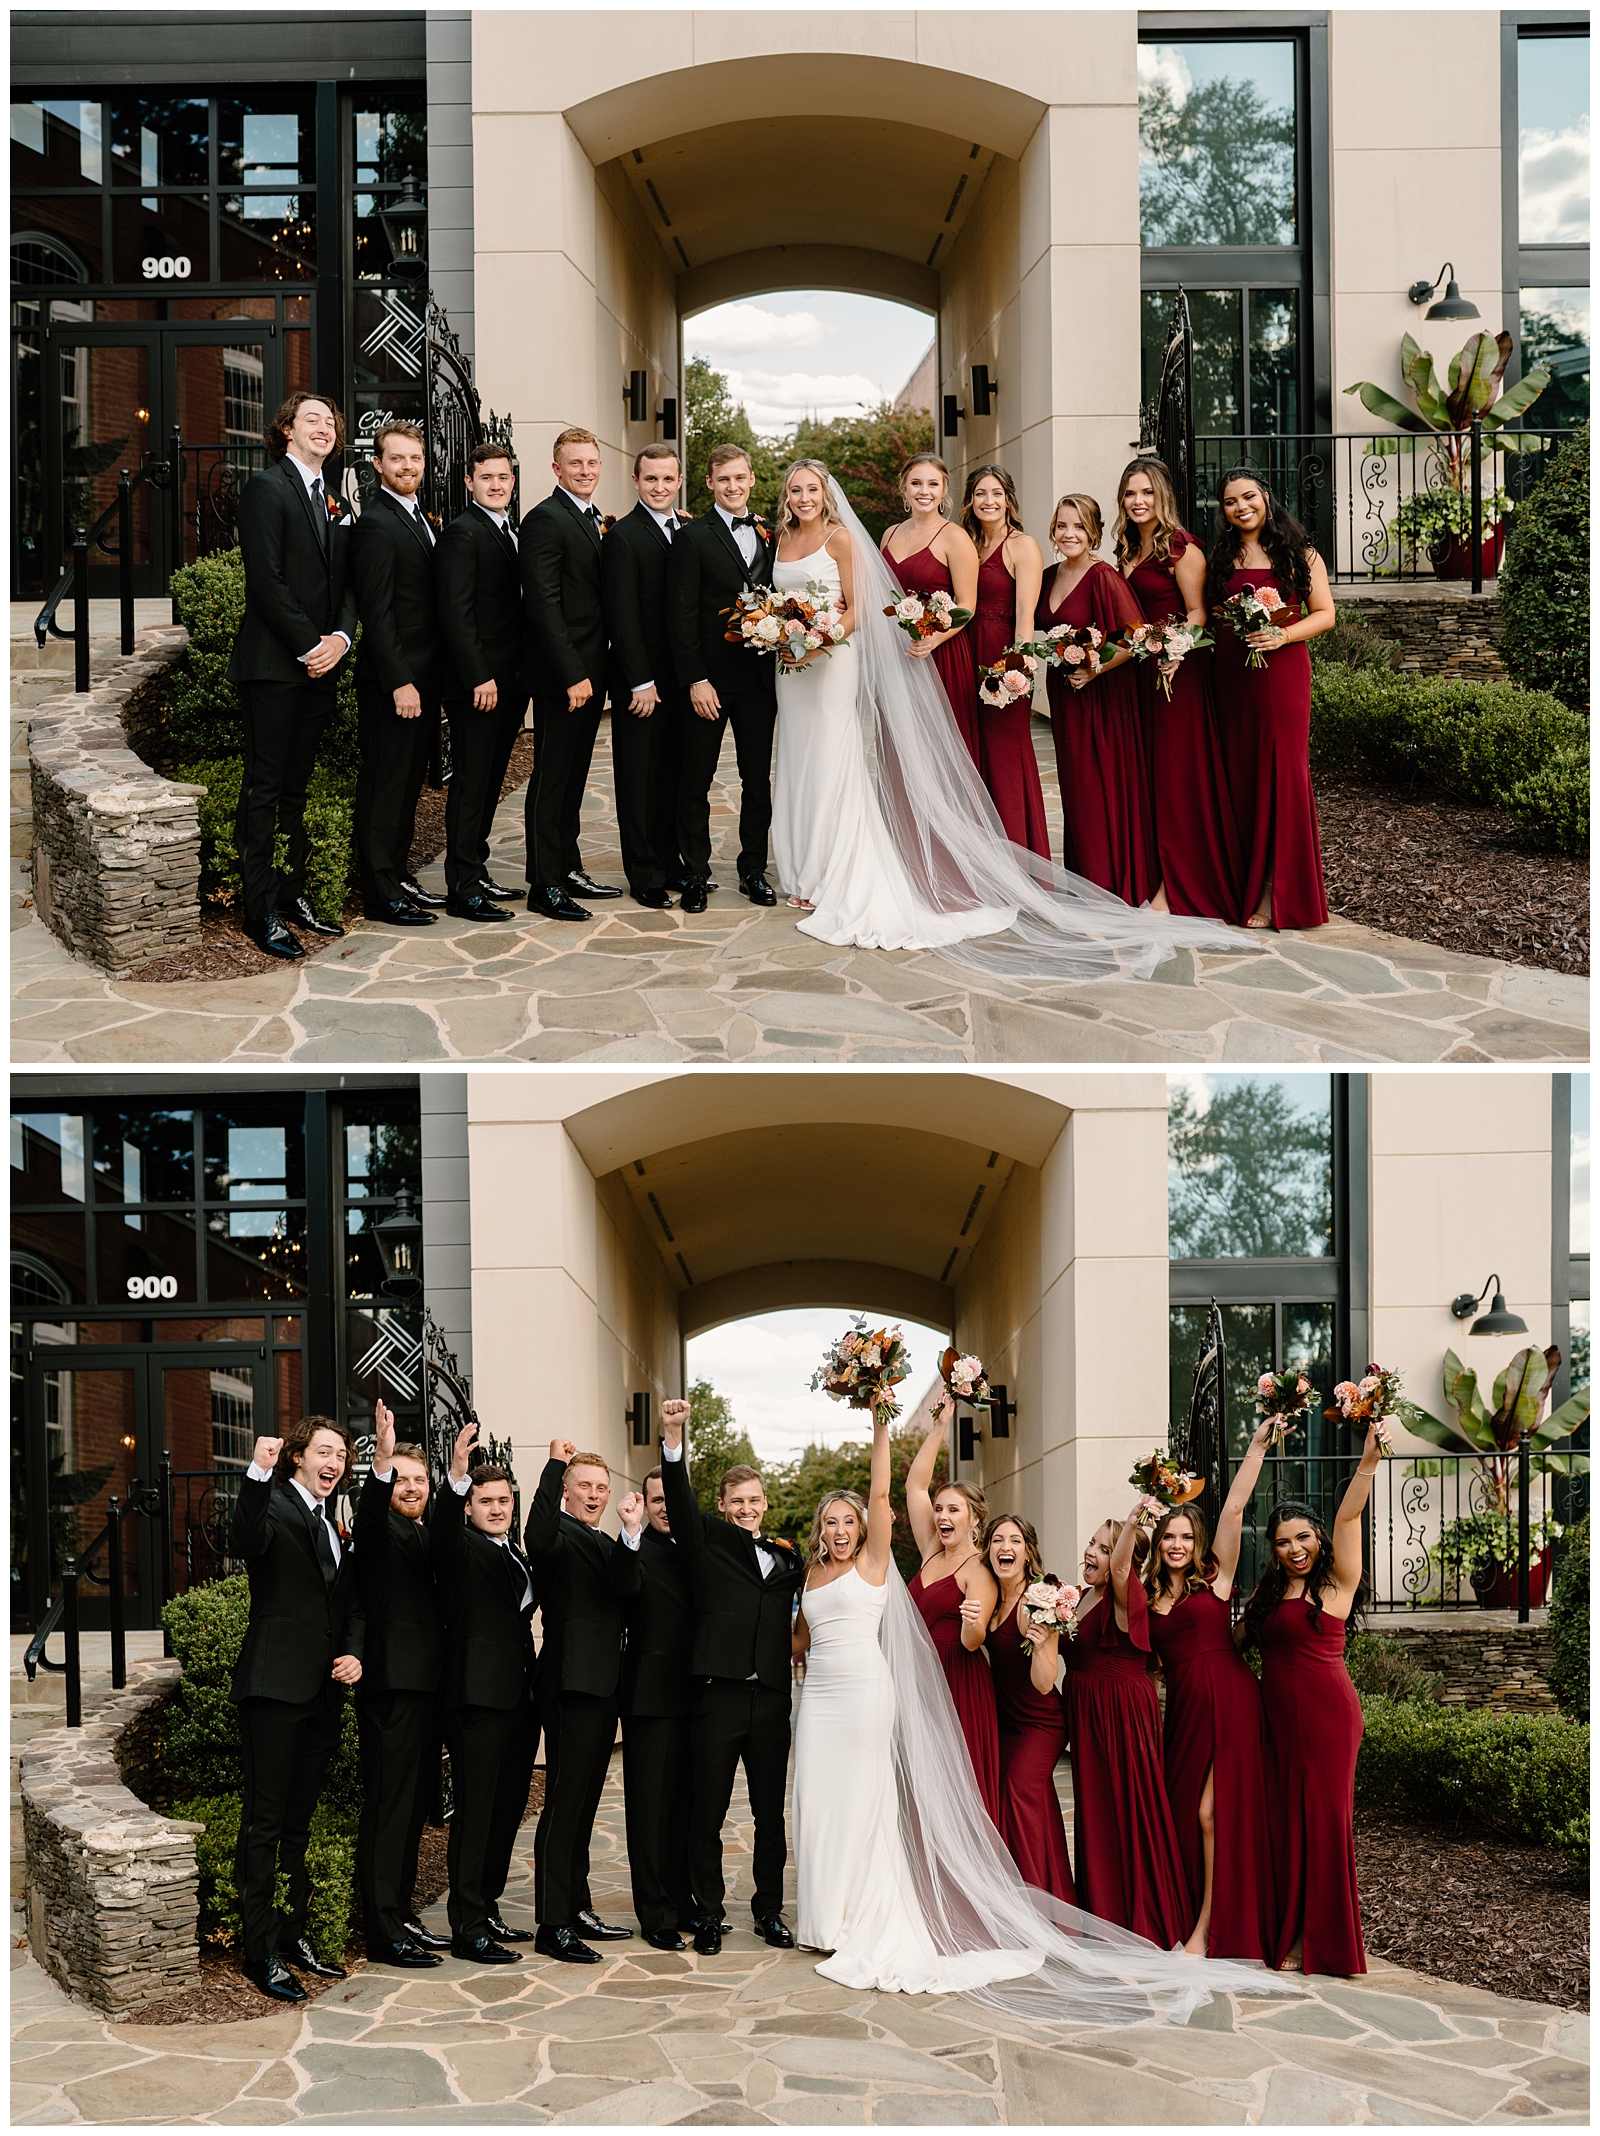 Full wedding party portraits at Revolution Mill in Greensboro, NC